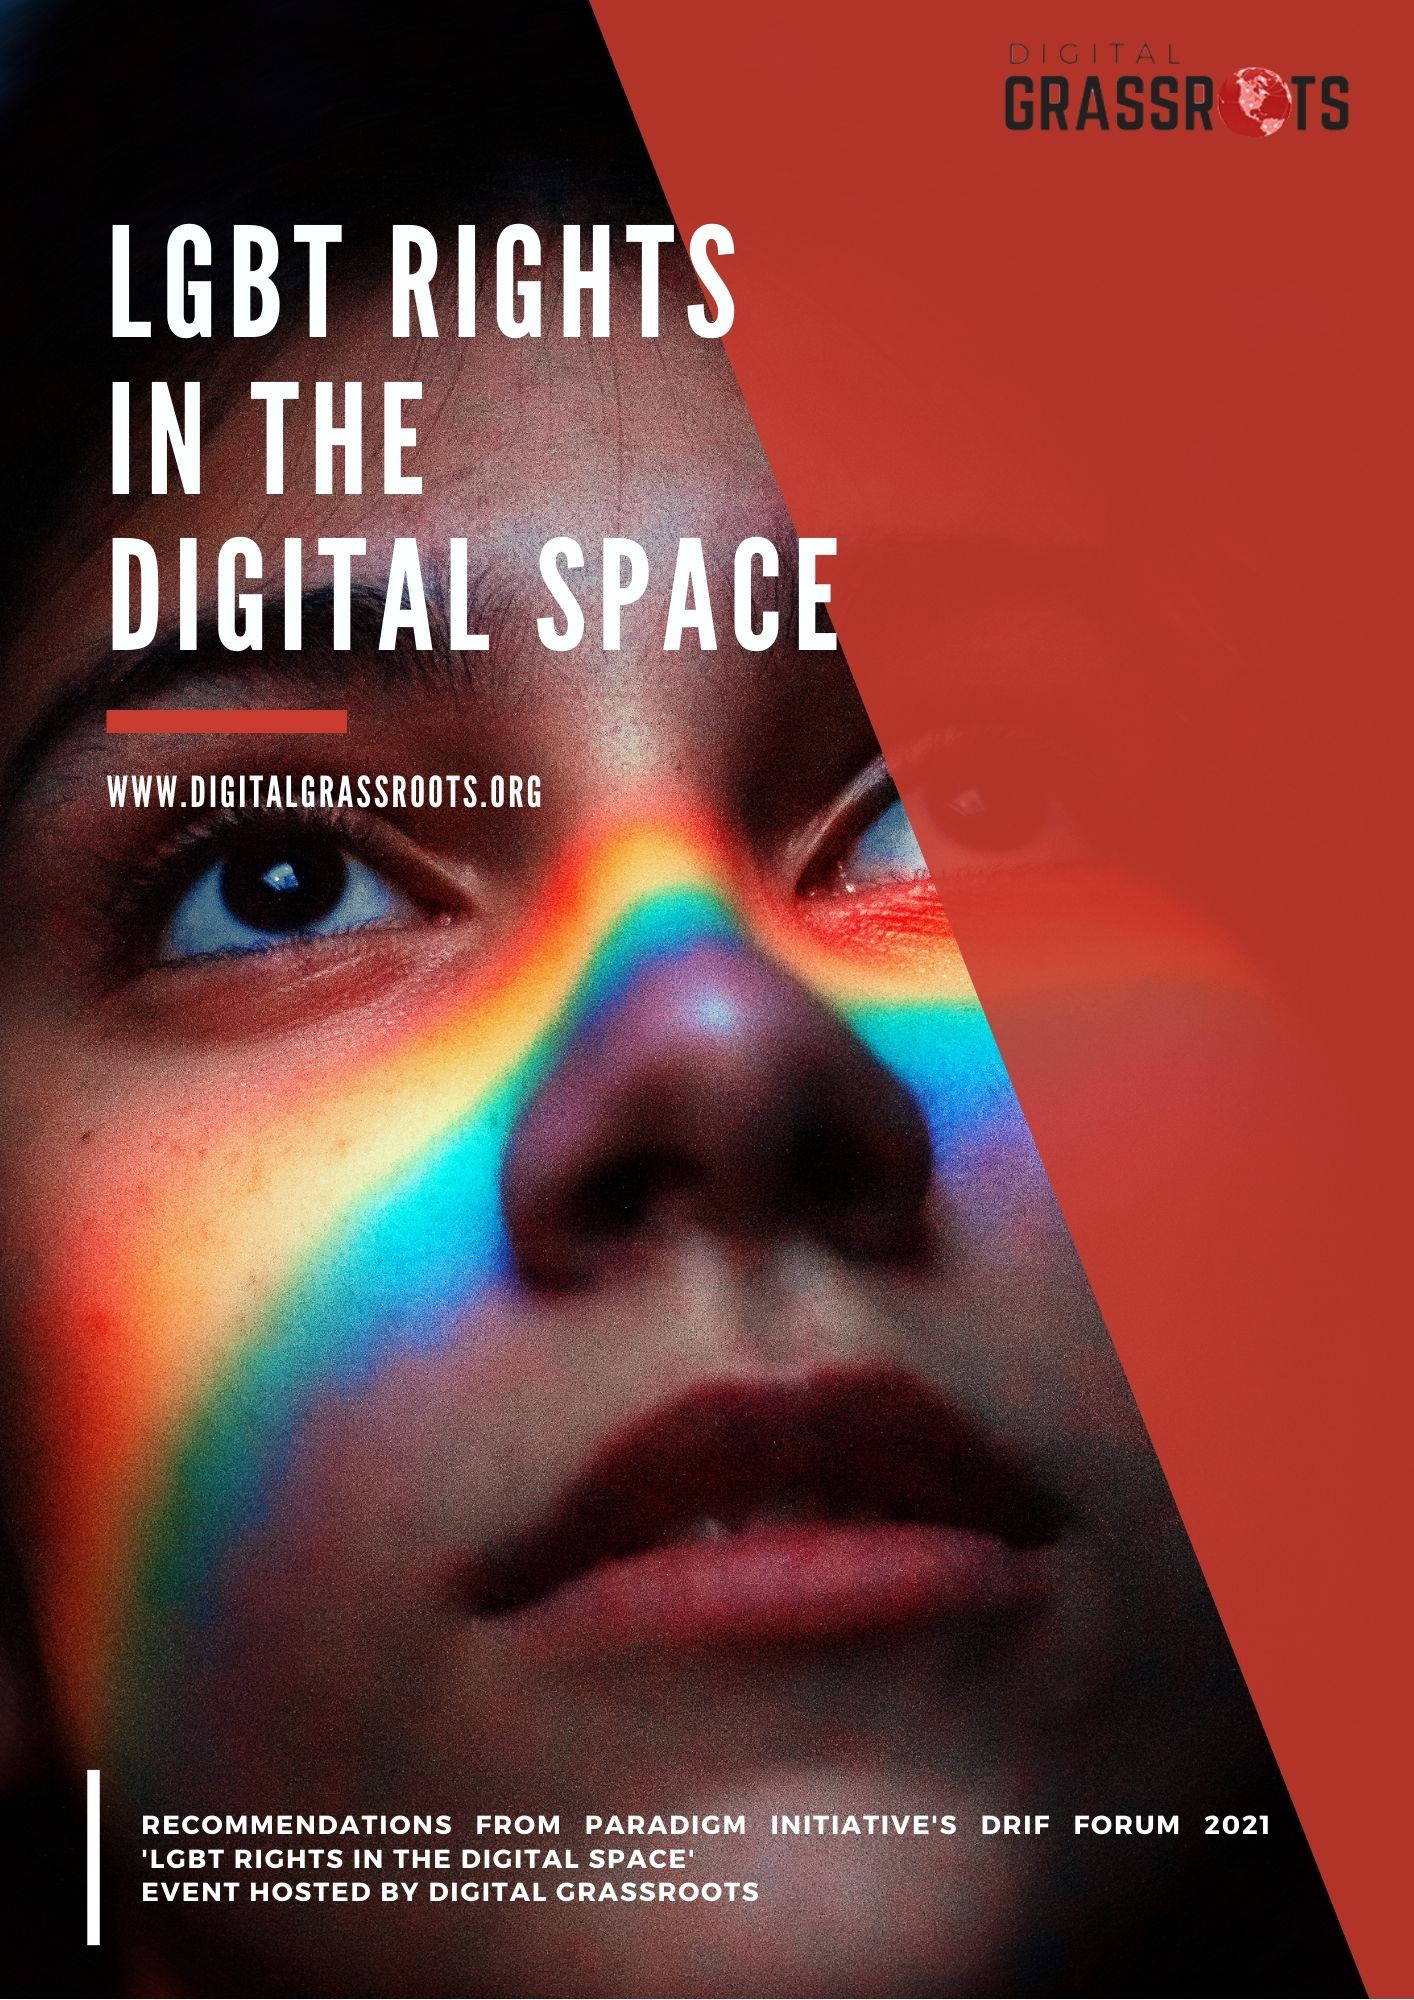 DRIF REPORT - LGBT Rights in Digital Space